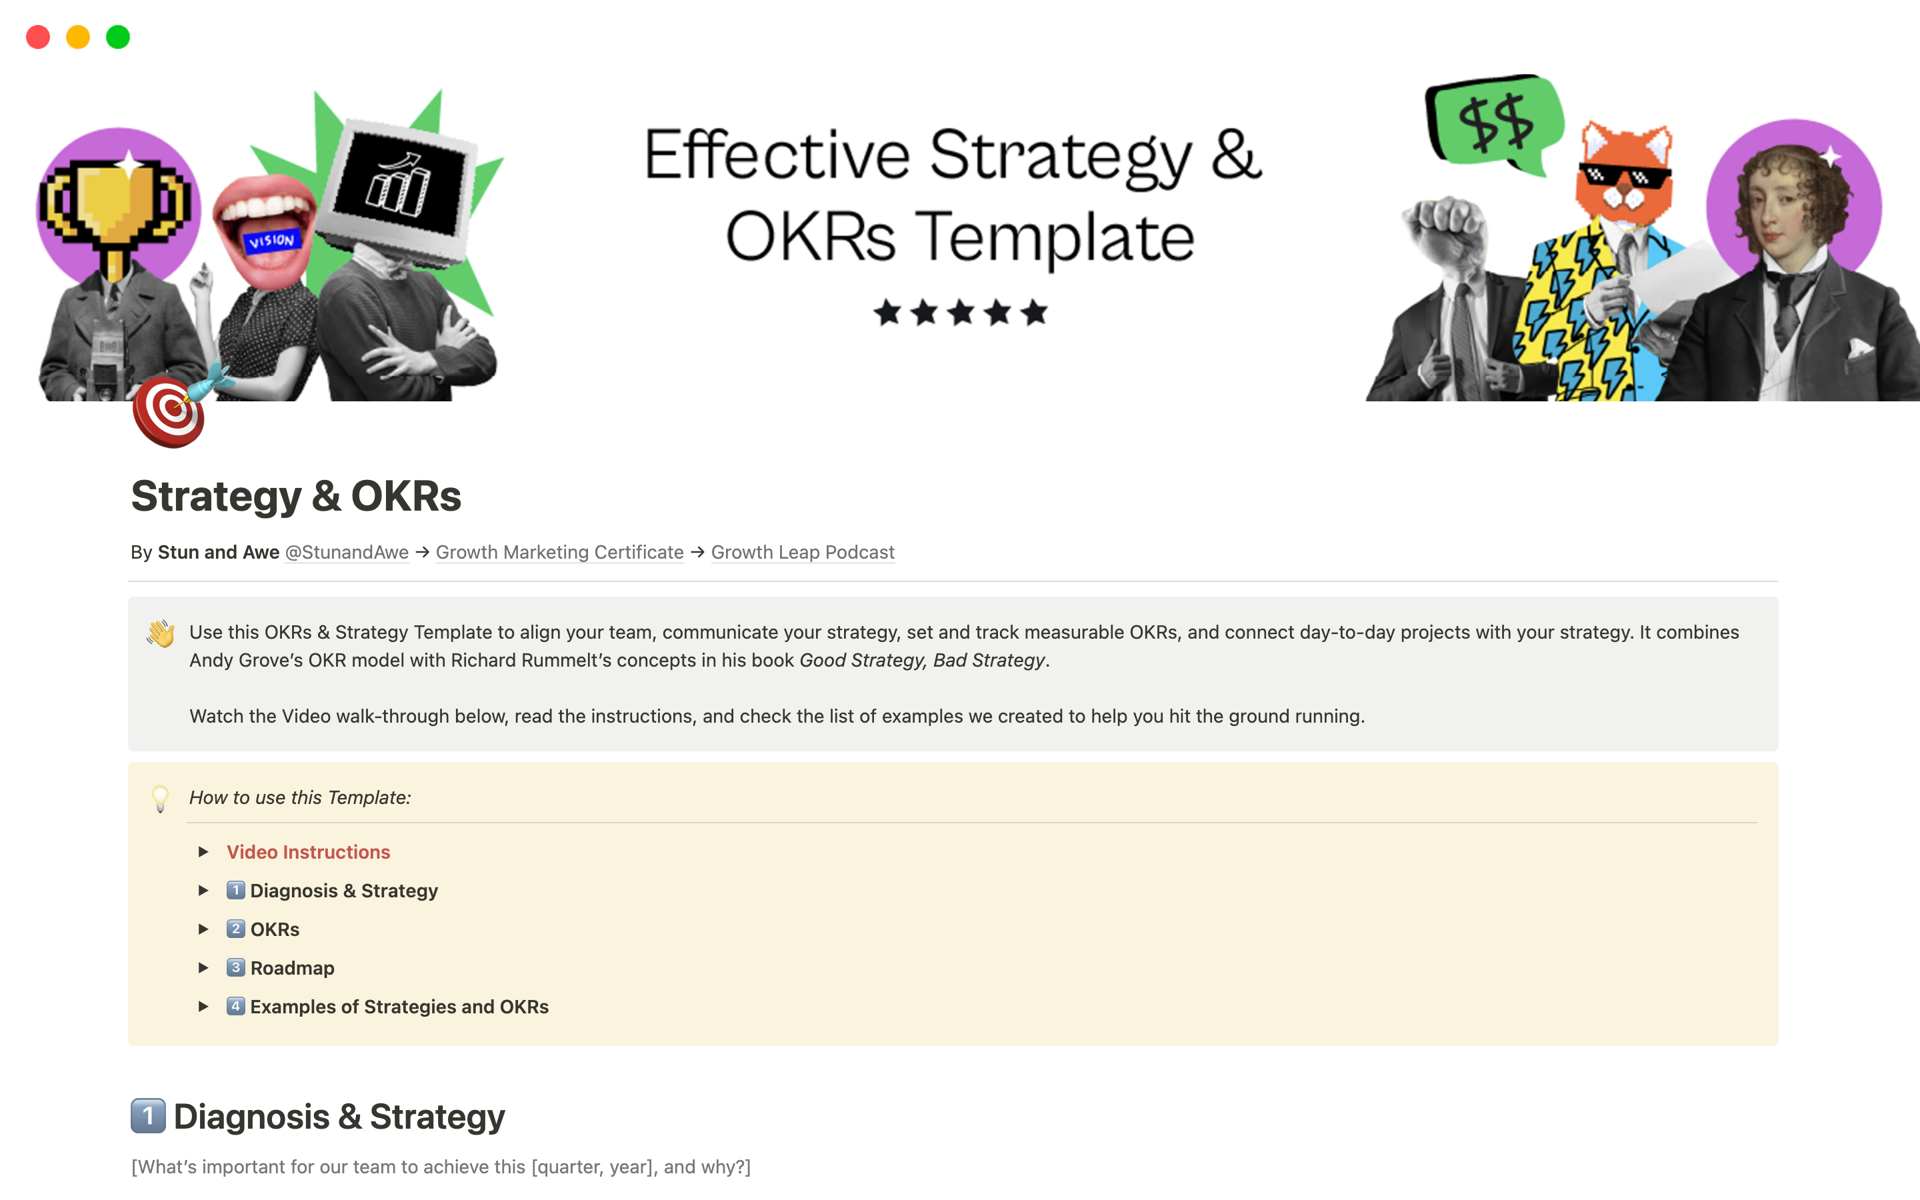 An OKR & Strategy notion template for ambitious teams who want to turn strategy into real results without getting lost in bureaucracy